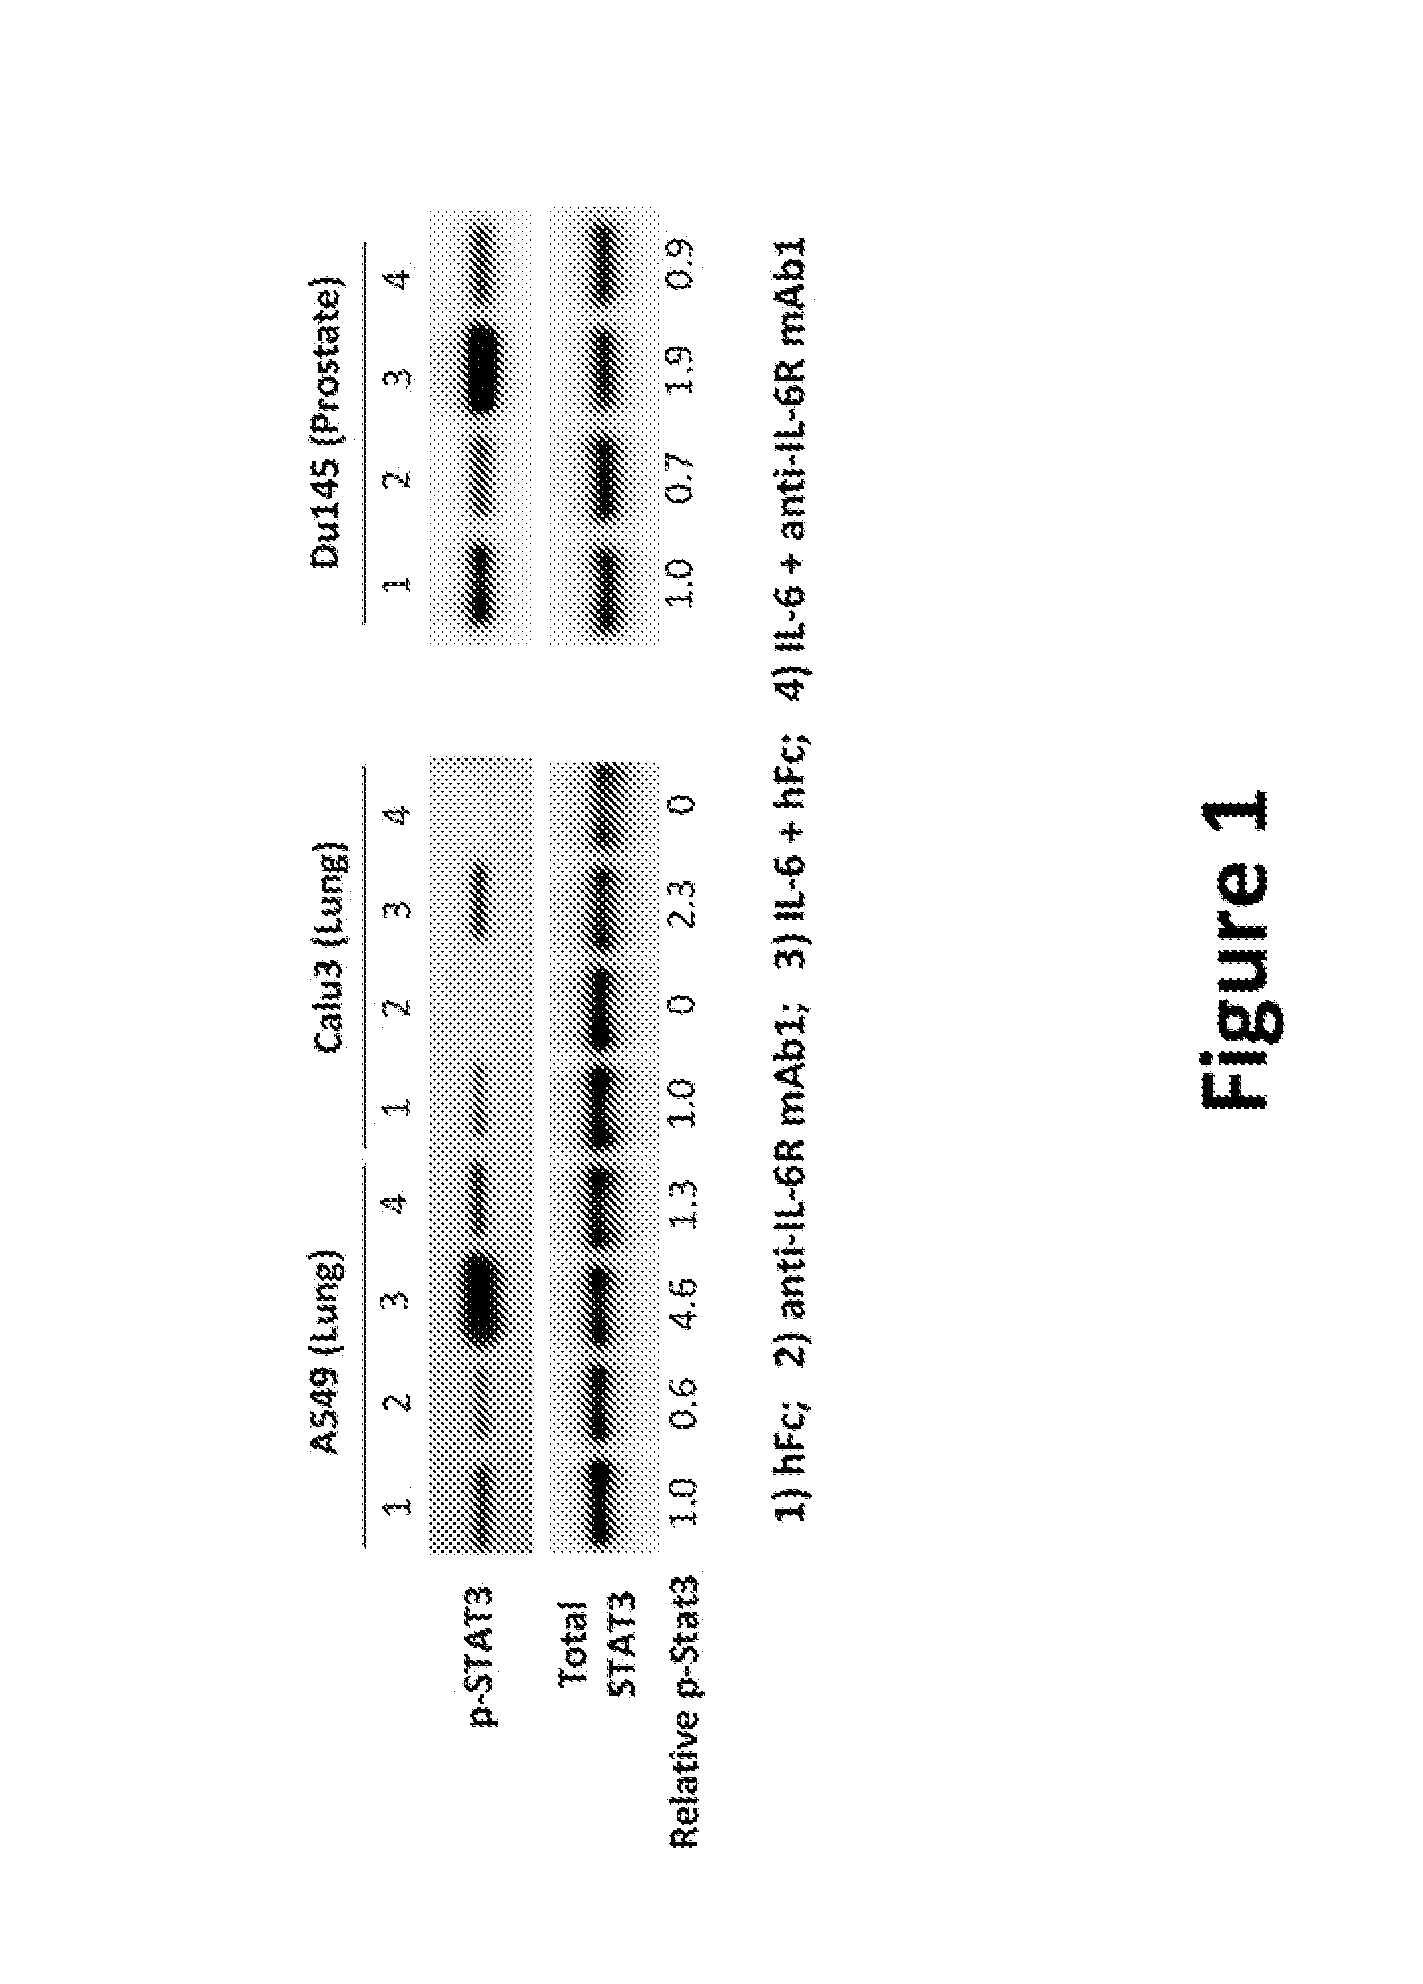 Methods of inhibiting tumor growth by antagonizing il-6 receptor